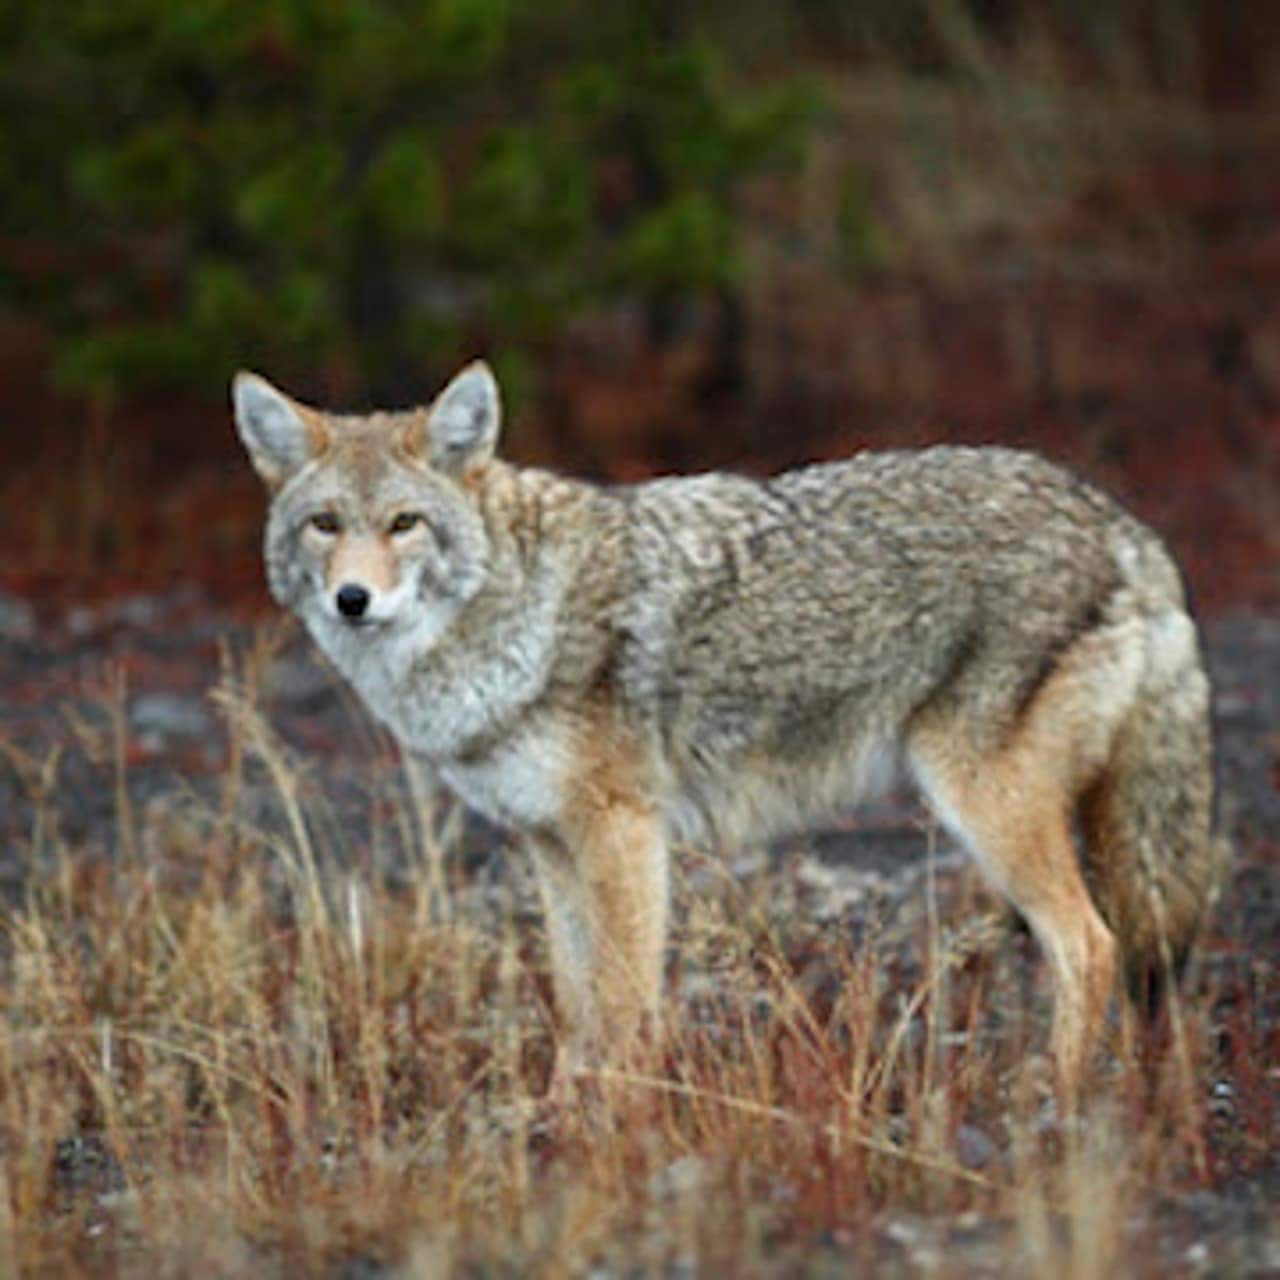 Coyotes hunters were ticketed for having loaded rifles in their vehicle.